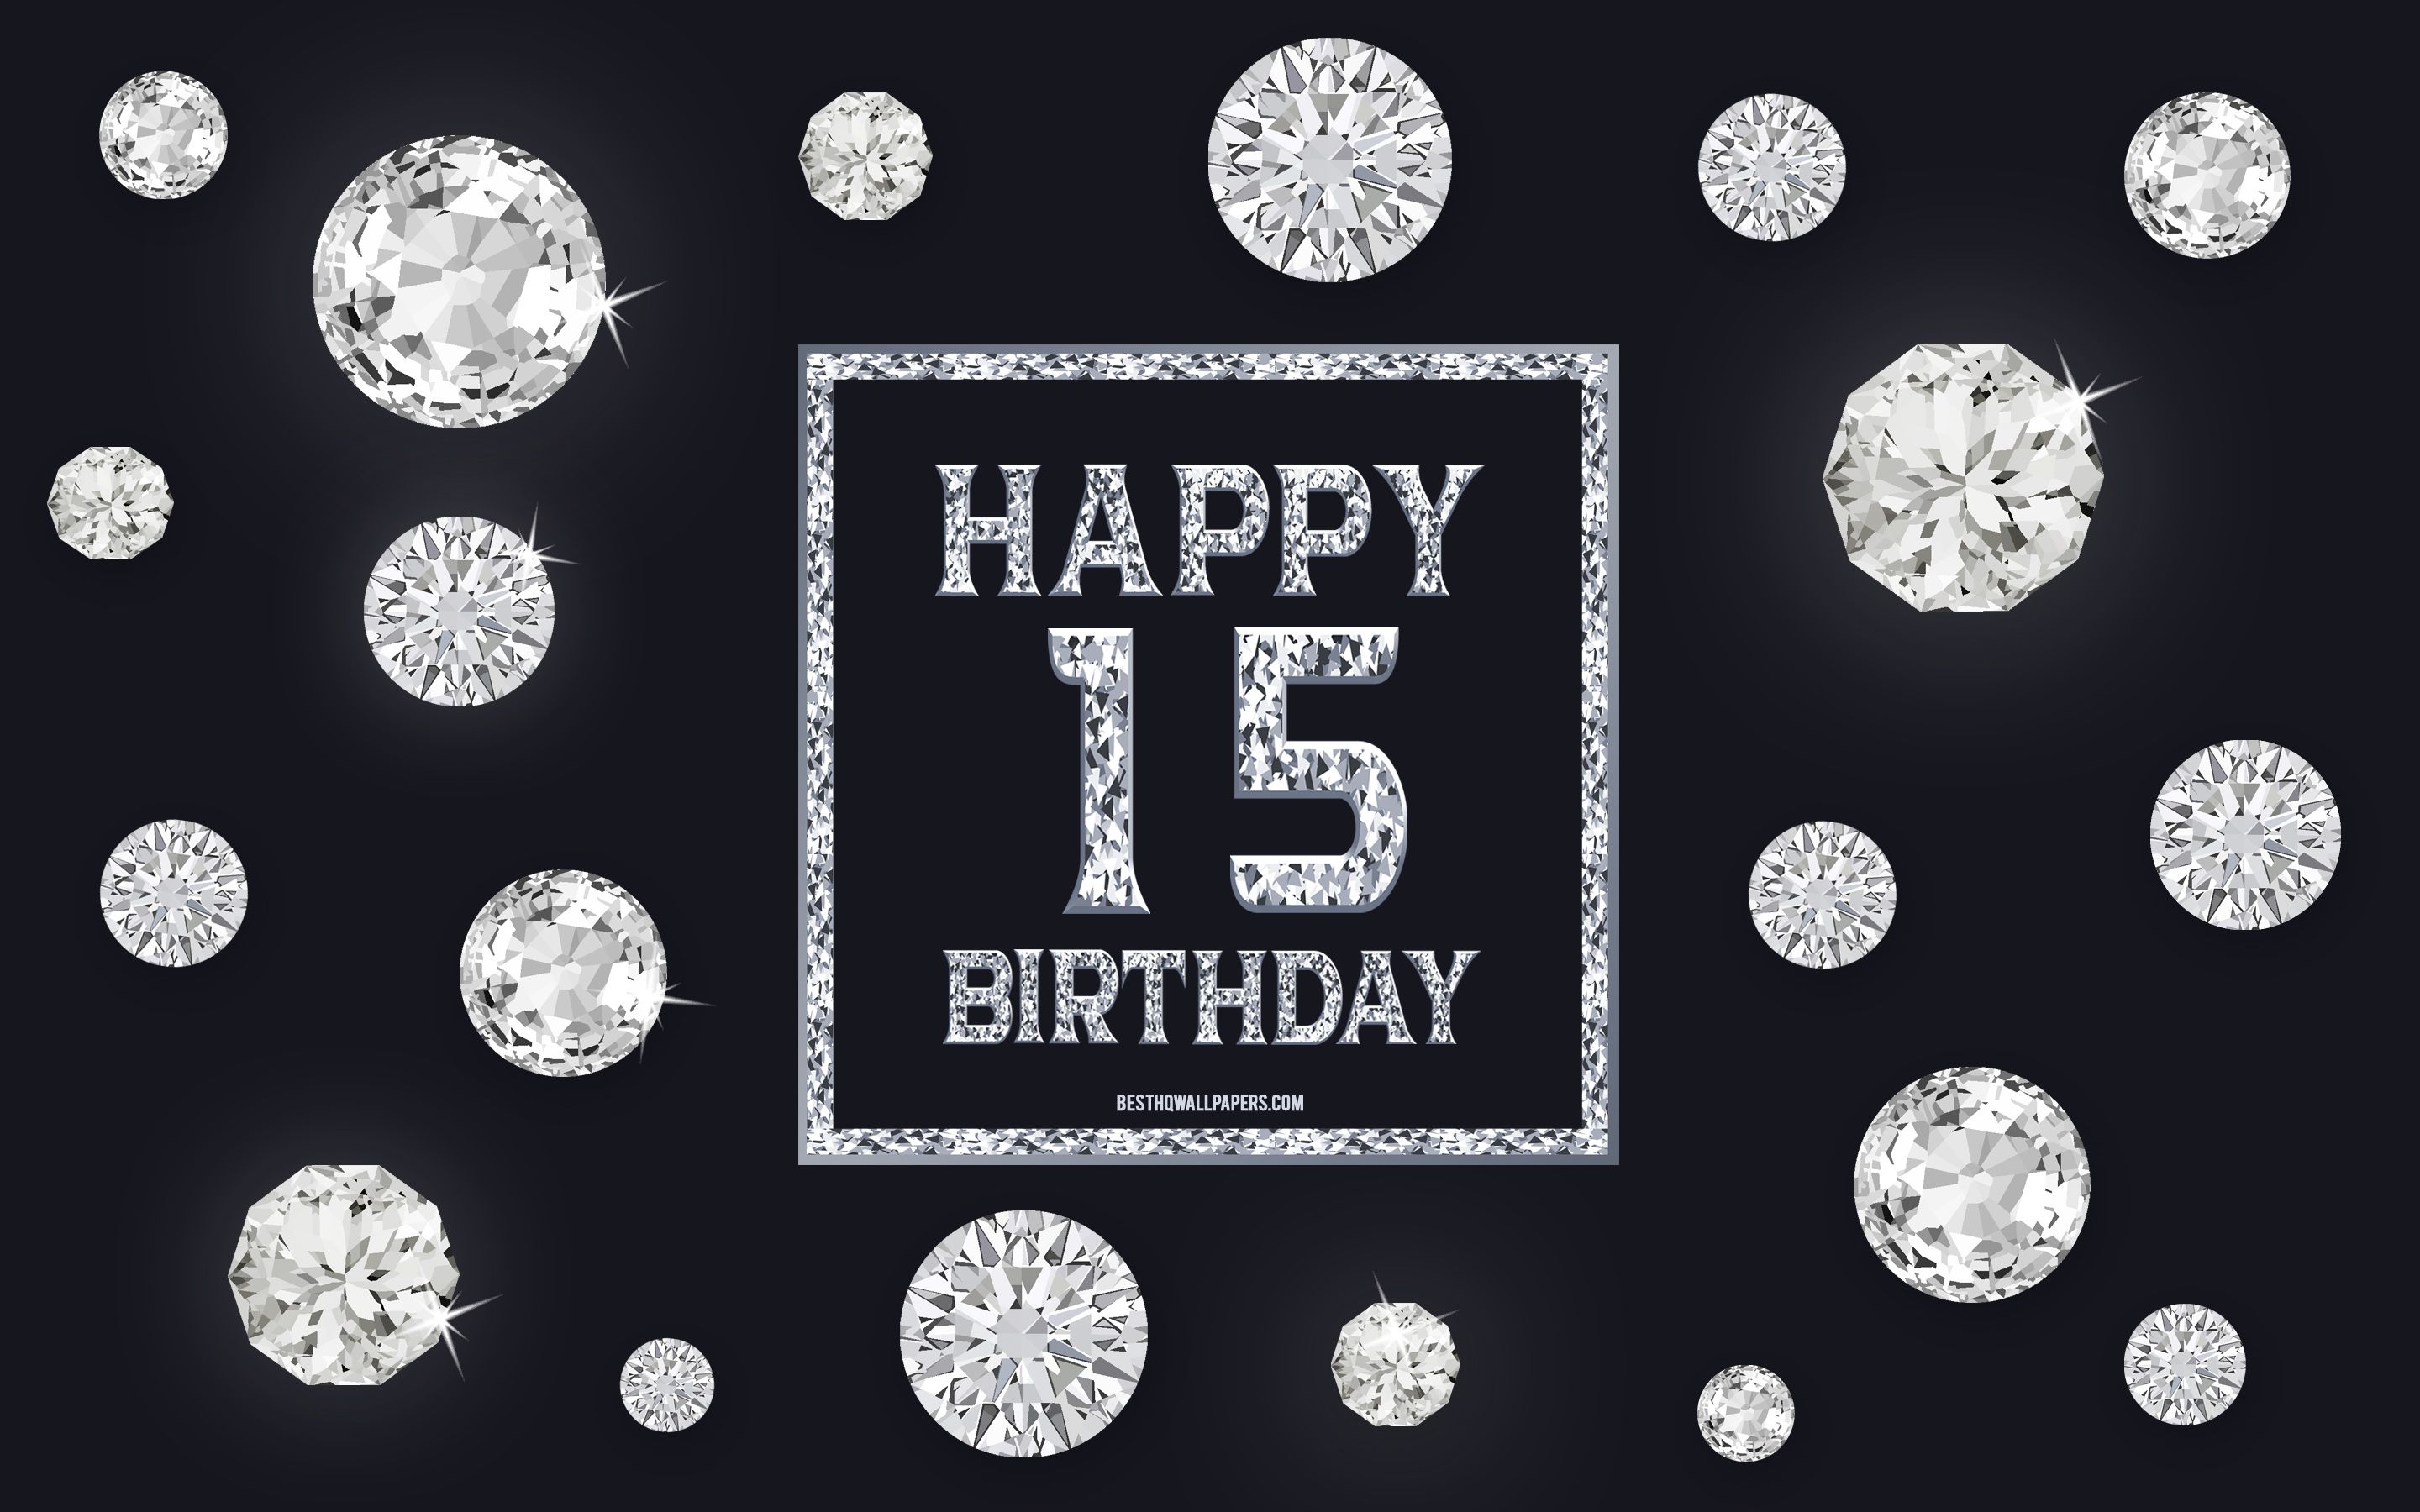 Download wallpaper 15th Happy Birthday, diamonds, gray background, Birthday background with gems, 15 Years Birthday, Happy 15th Birthday, creative art, Happy Birthday background for desktop with resolution 2880x1800. High Quality HD picture